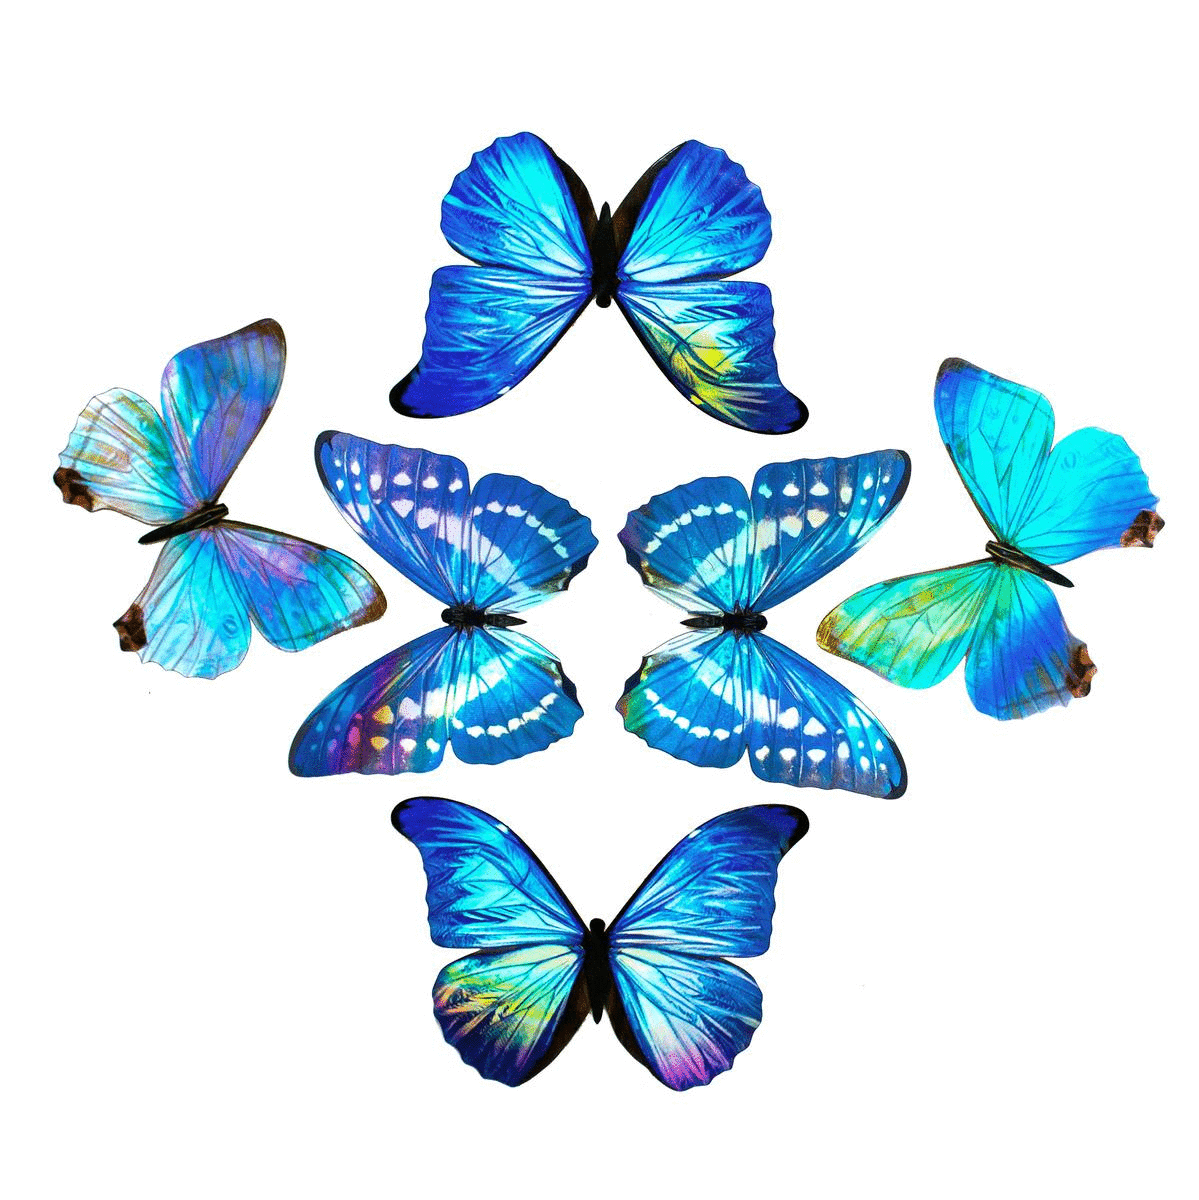 Holographic Morpho Butterfly Sticker Pack Artist Wholesale